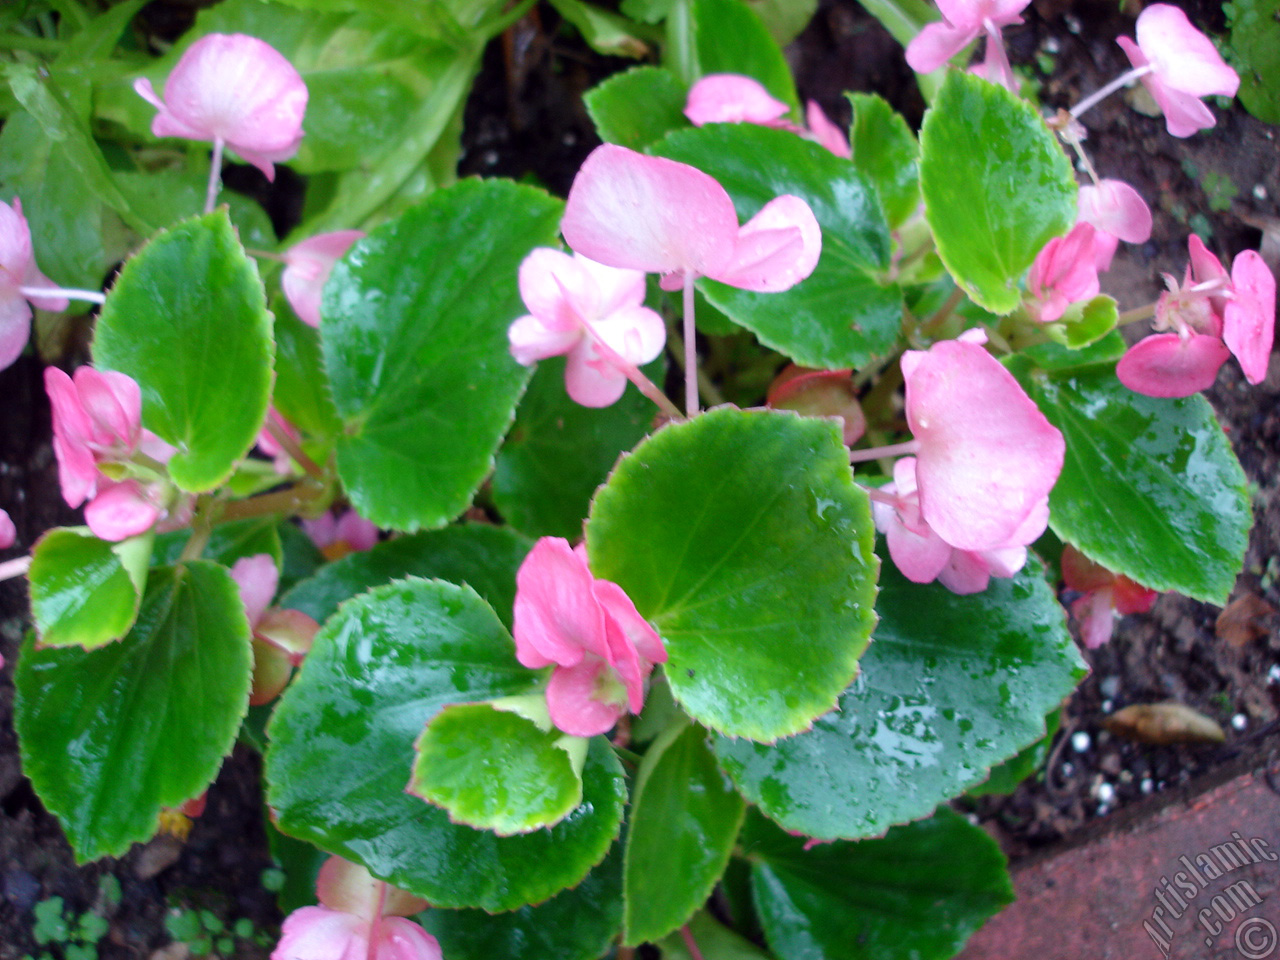 Wax Begonia -Bedding Begonia- with pink flowers and green leaves.
